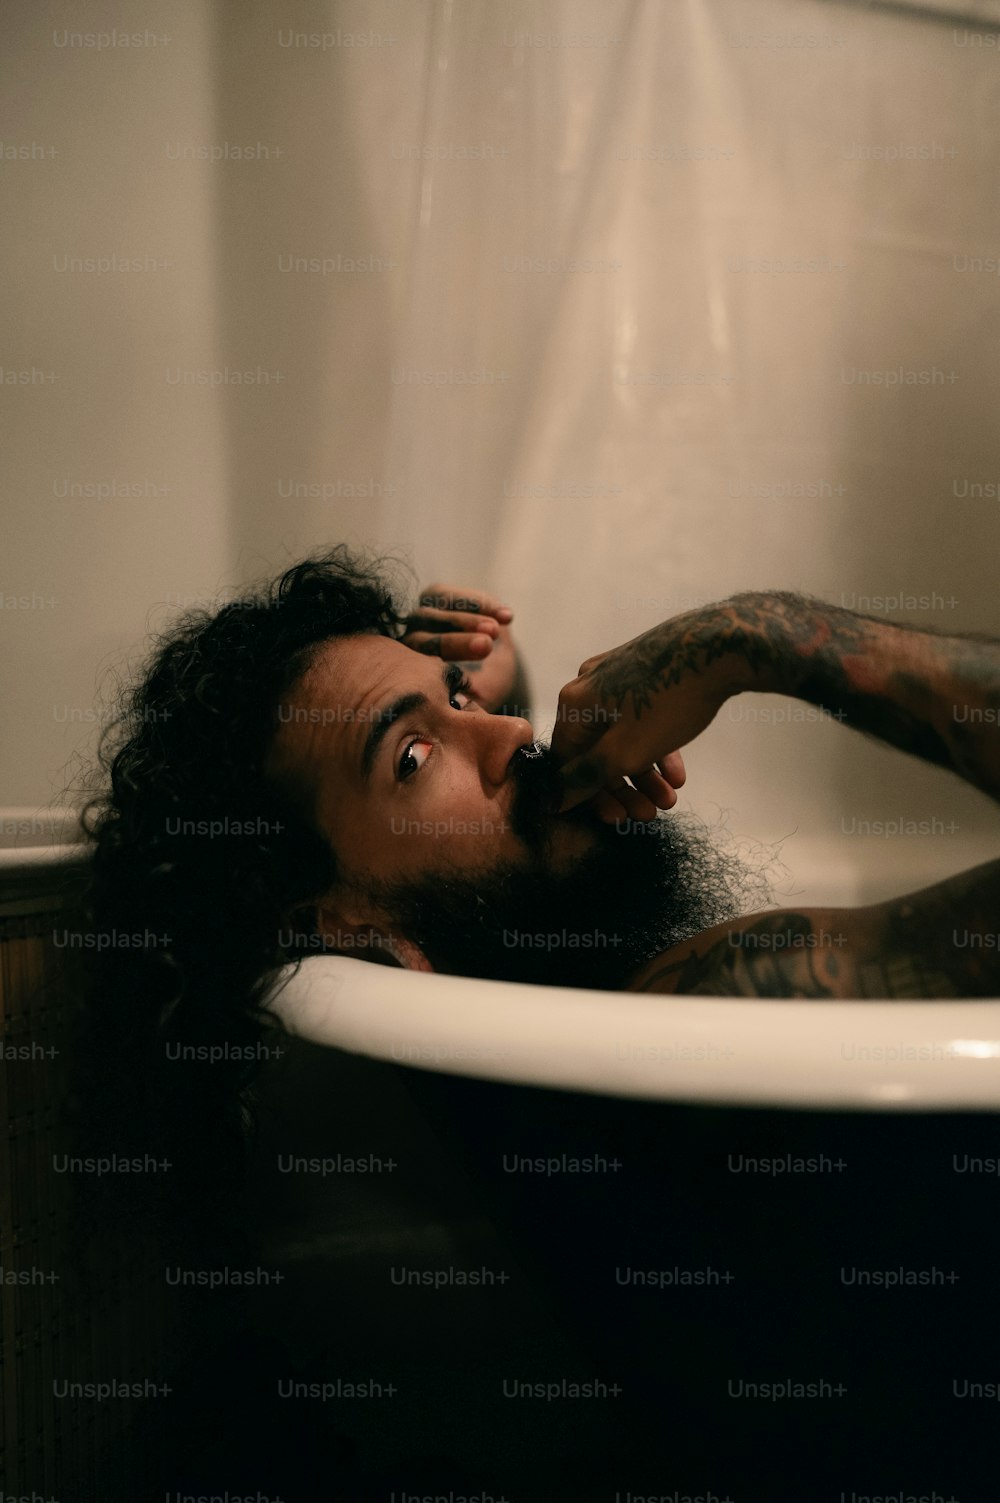 a woman in a bathtub with a tattoo on her arm